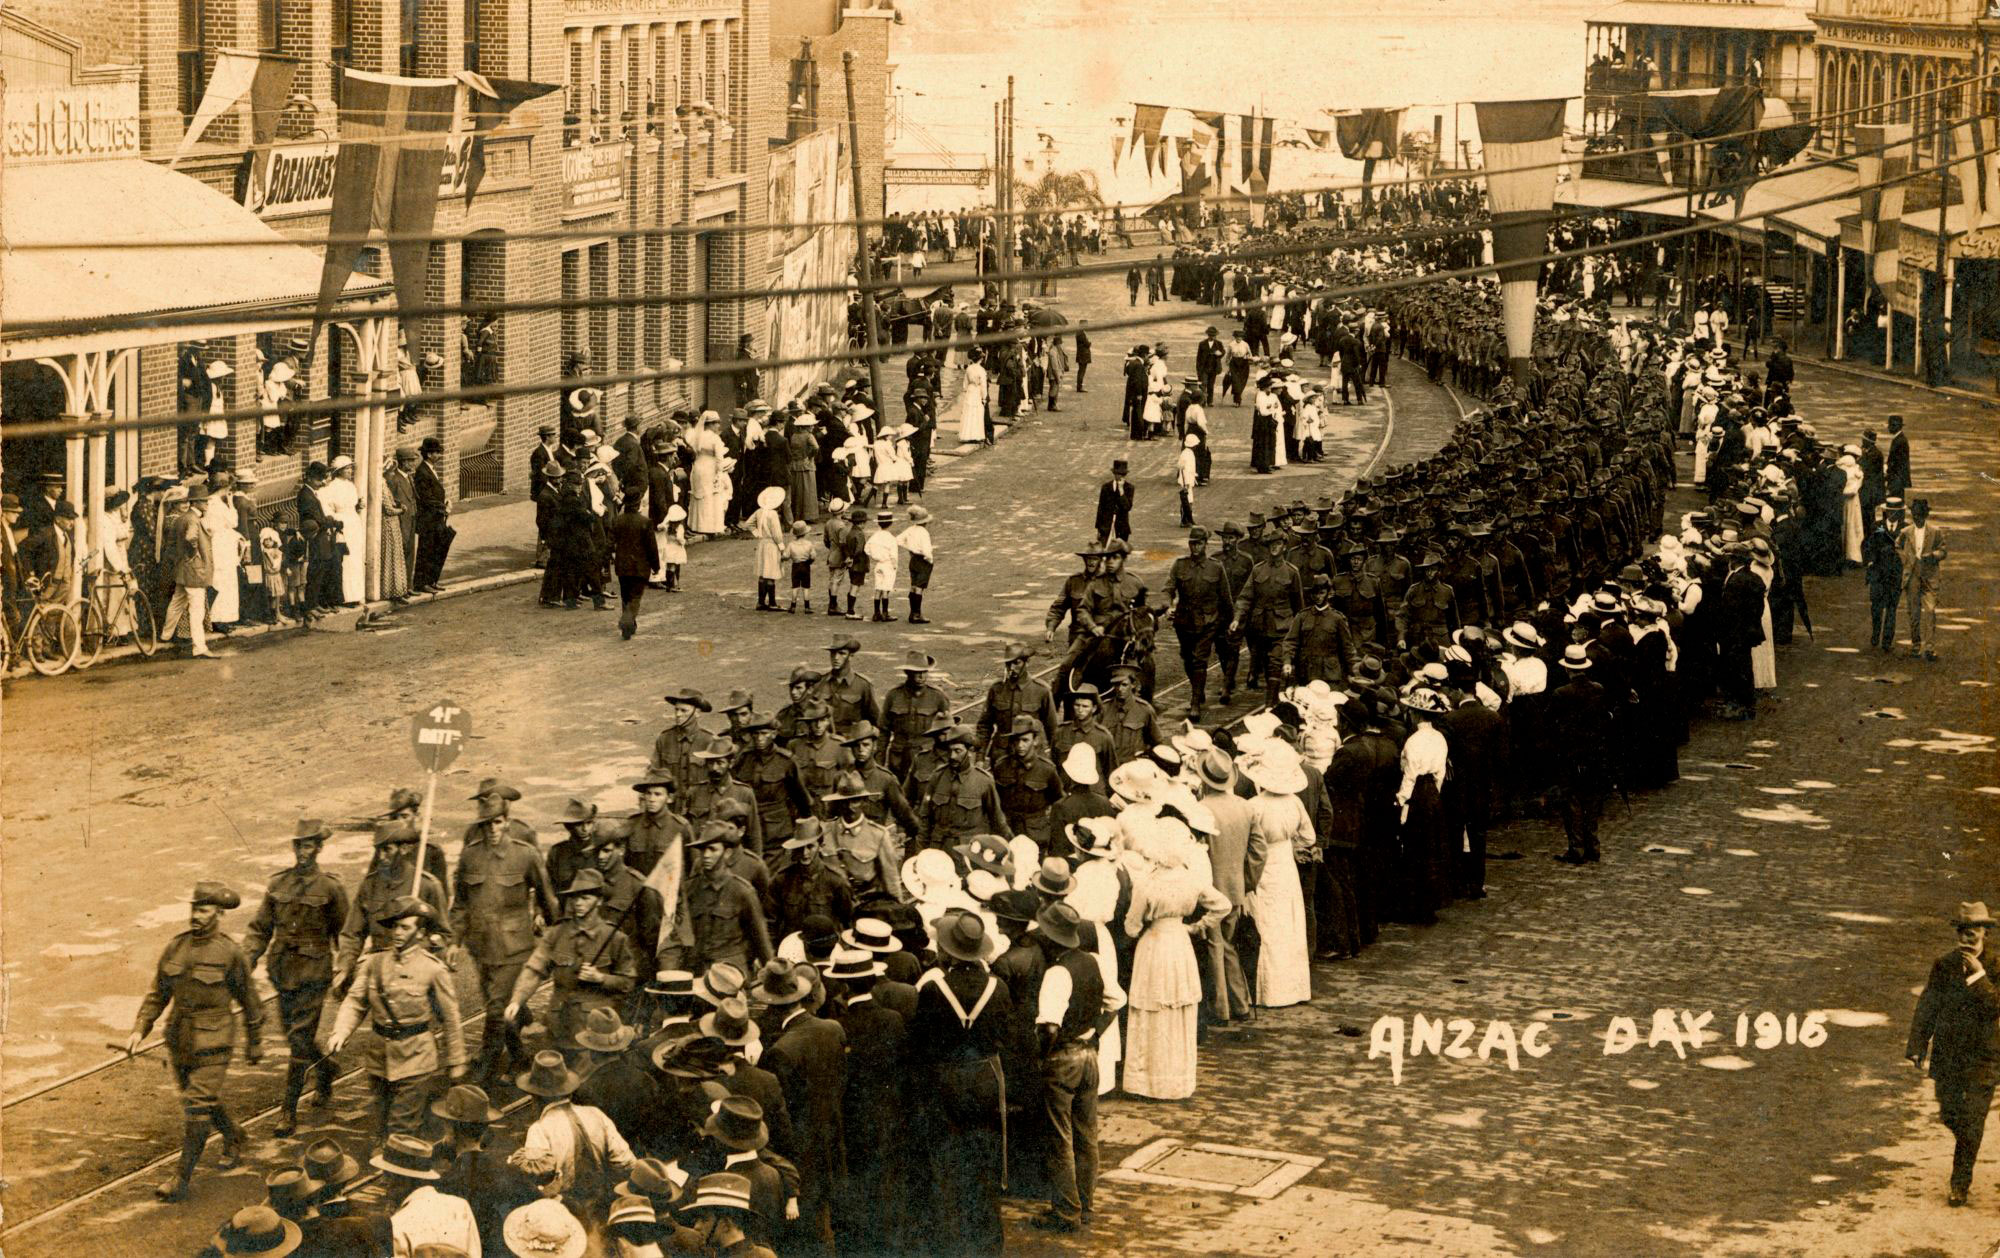 Anzac Day procession through the streets of Brisbane, 1916.